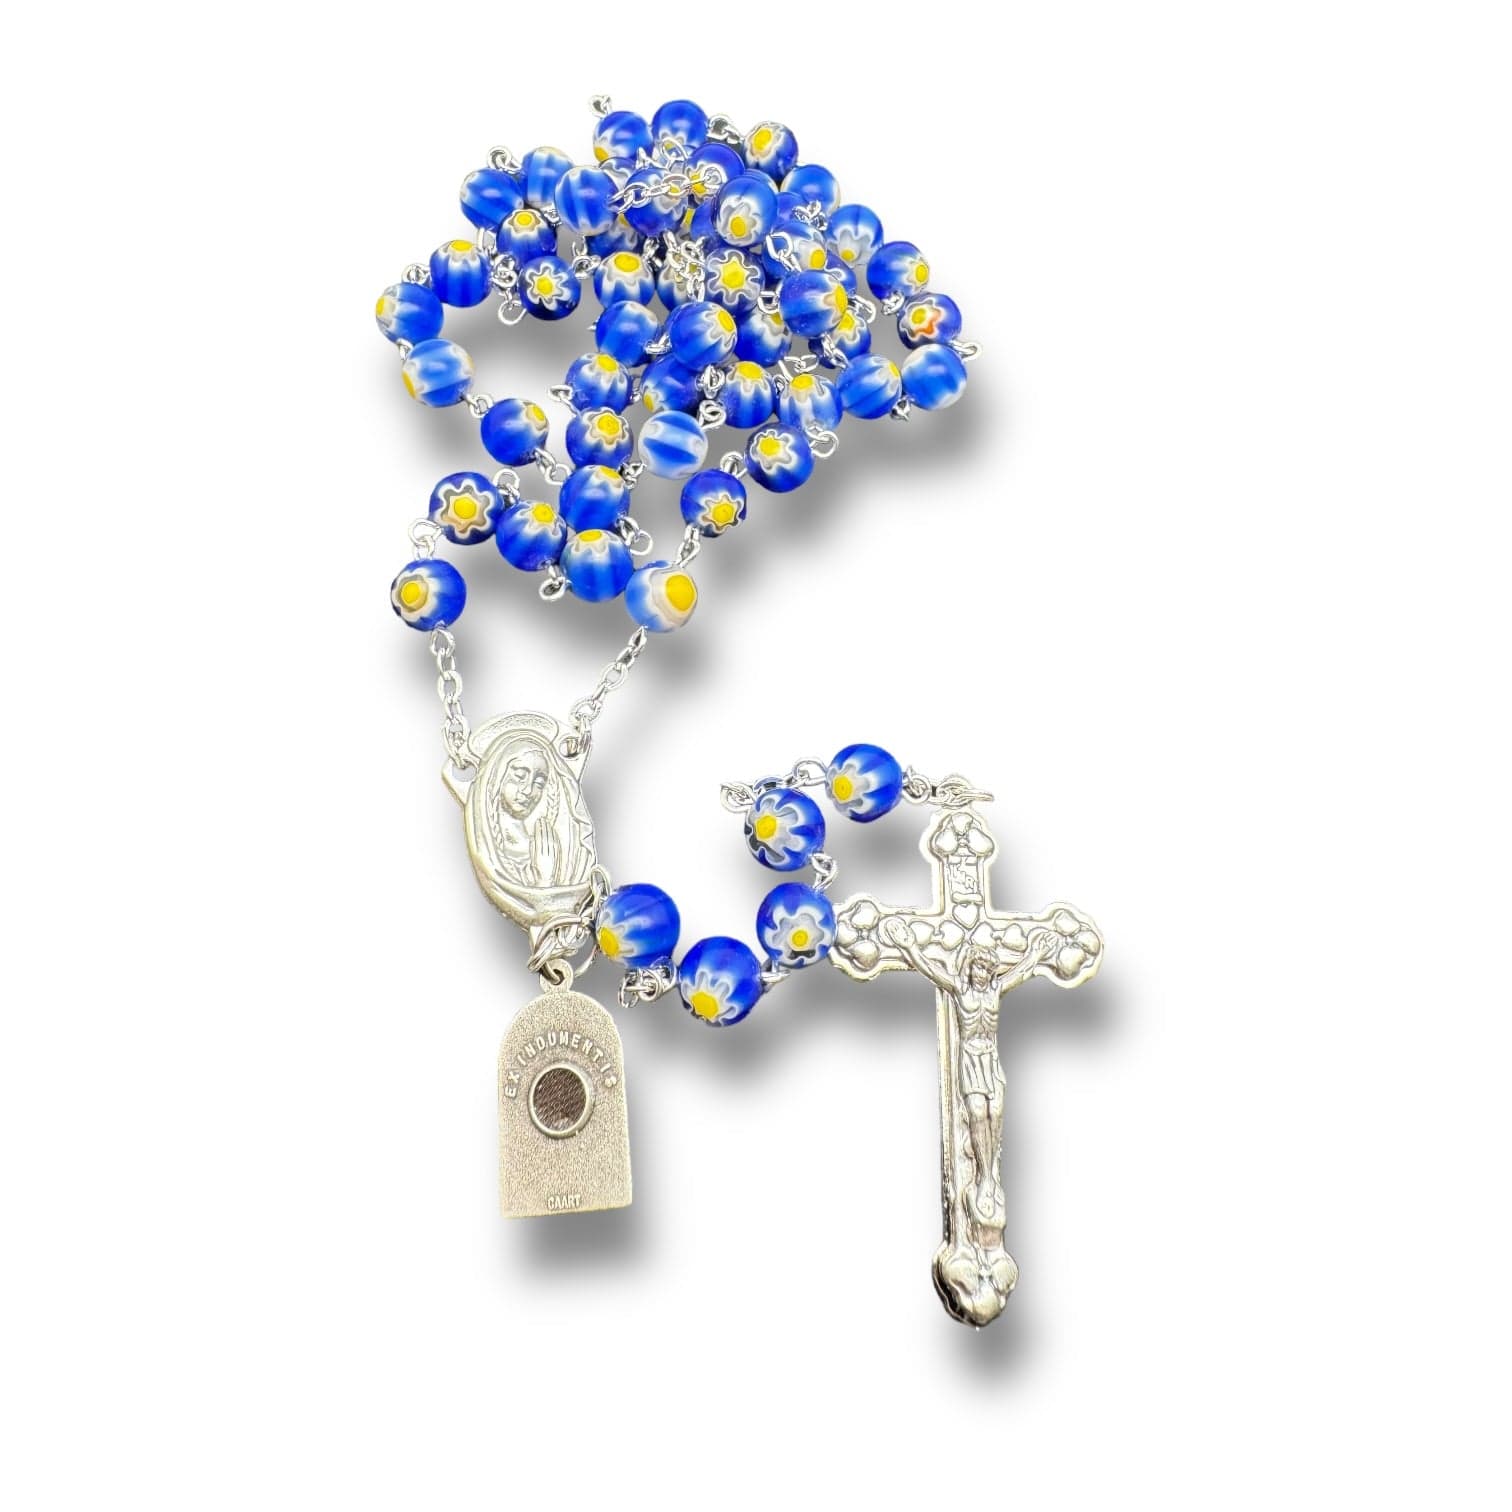 Catholically Rosaries St. Pio Blue Rosary Blessed By Pope w/ 2nd Class Relic - St. Father Pio